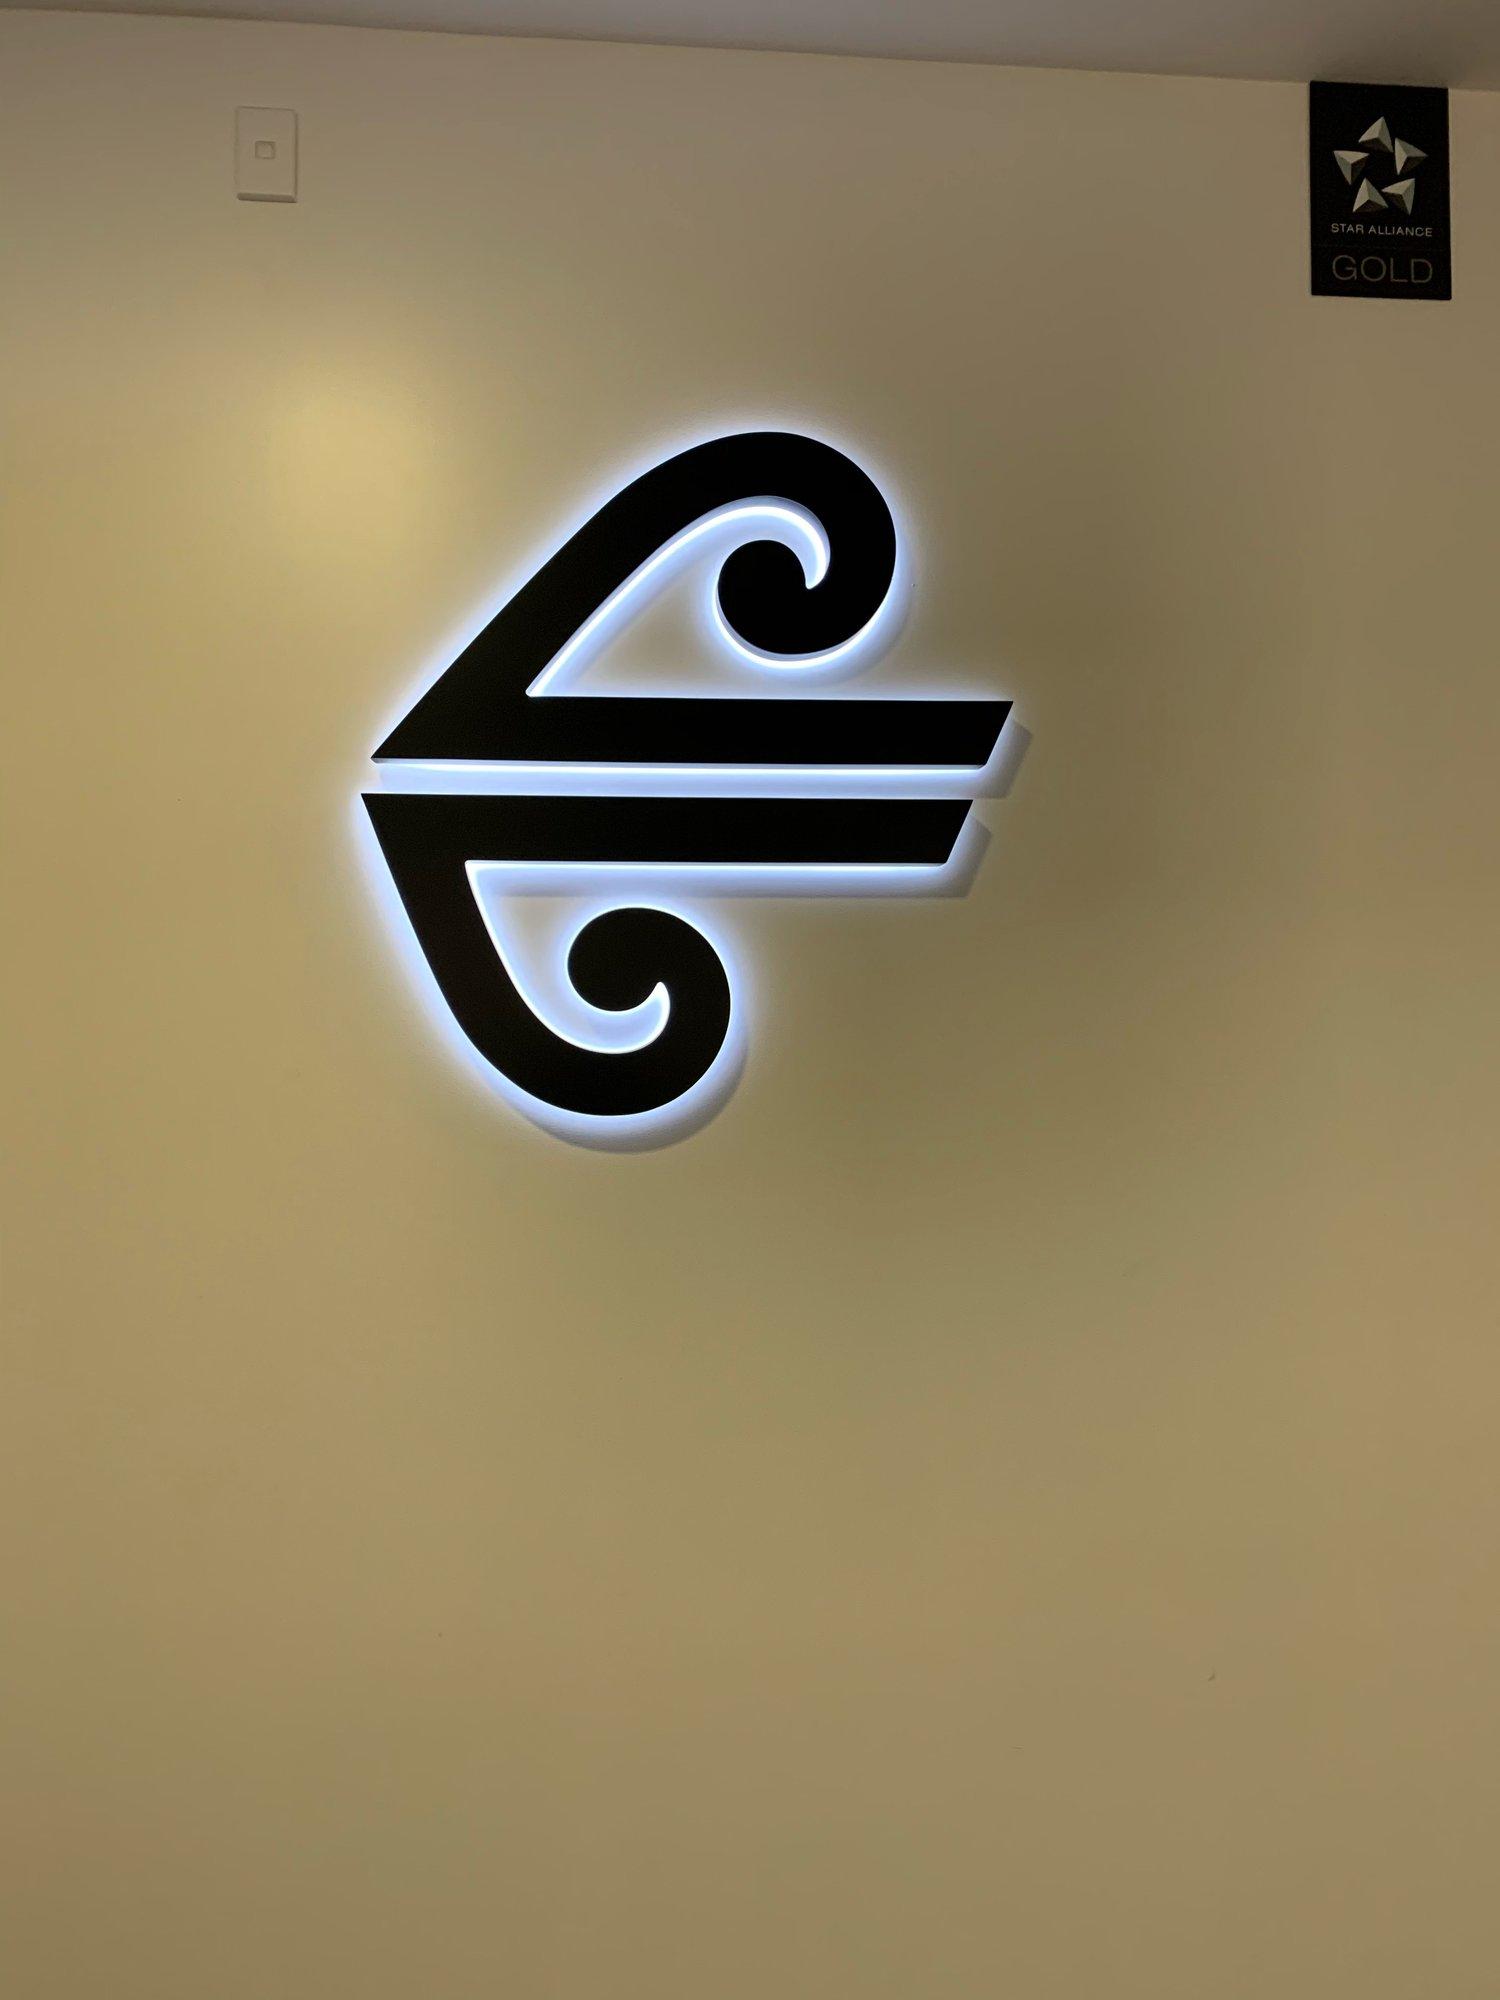 Air New Zealand Domestic Lounge image 4 of 6